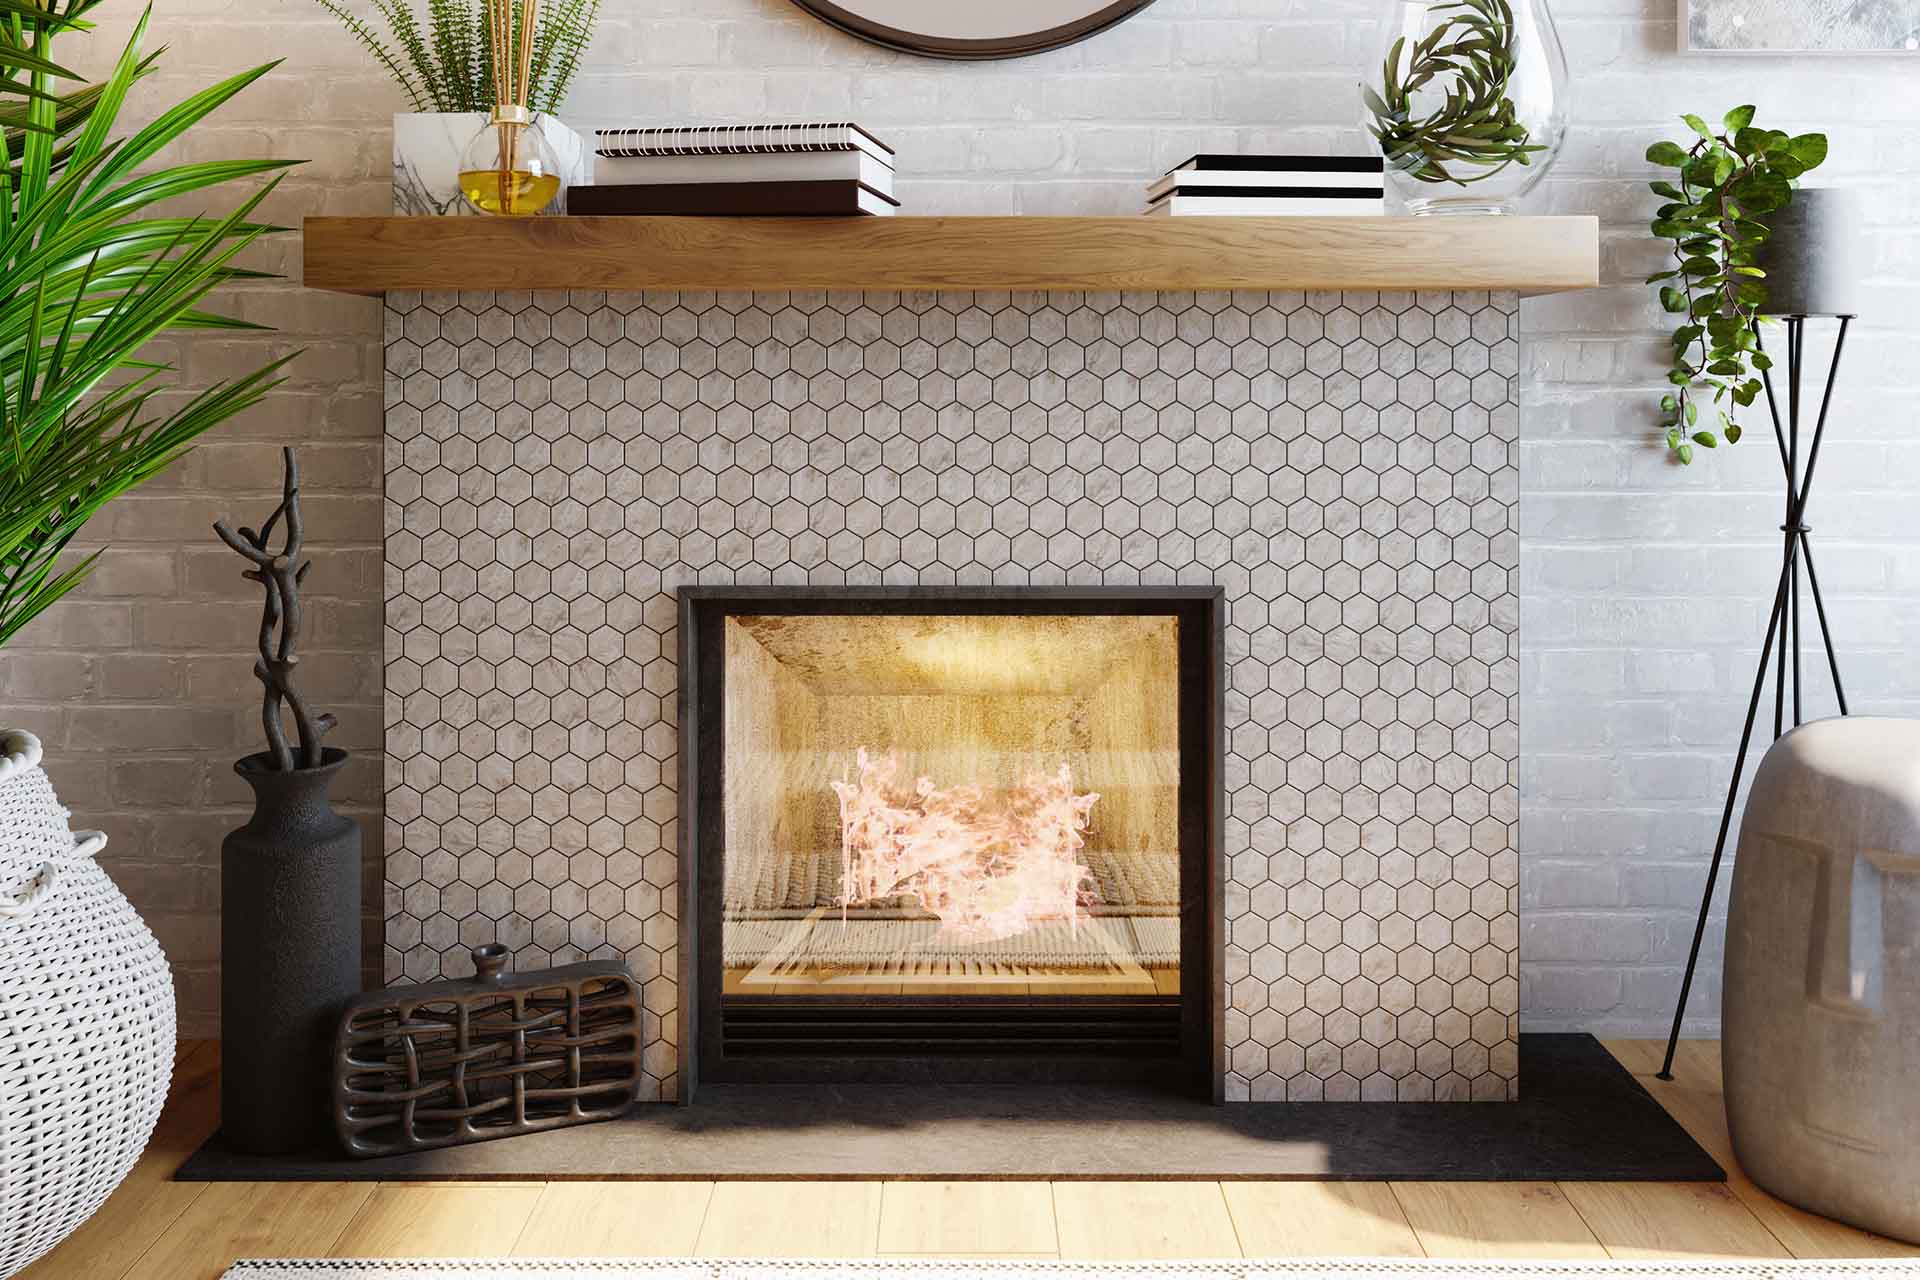 How To Tile A Fireplace: An Expert Reno Guide